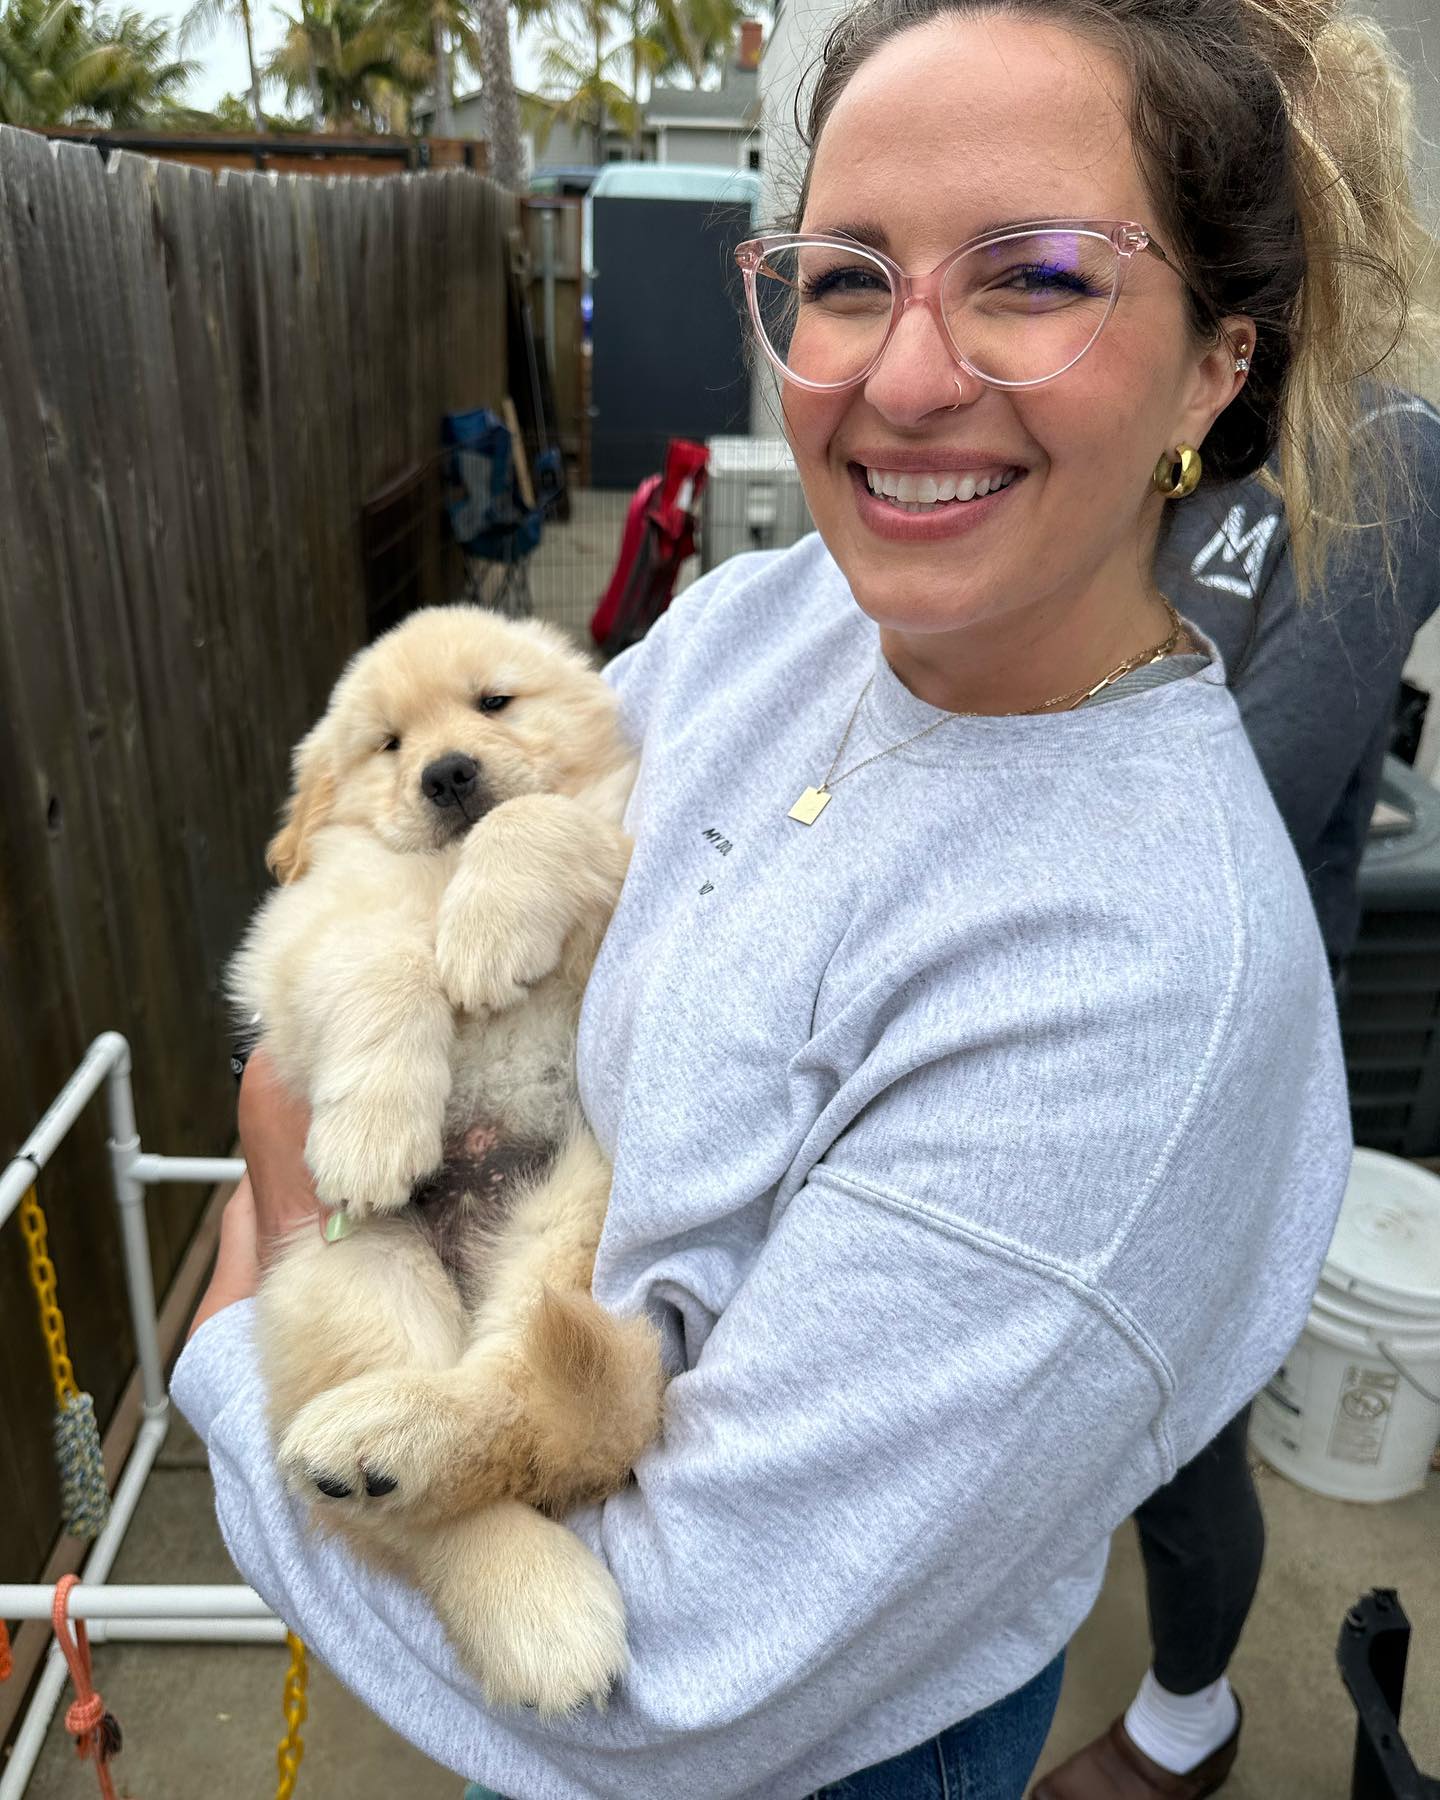 Woman smiling while holding a golden puppy.